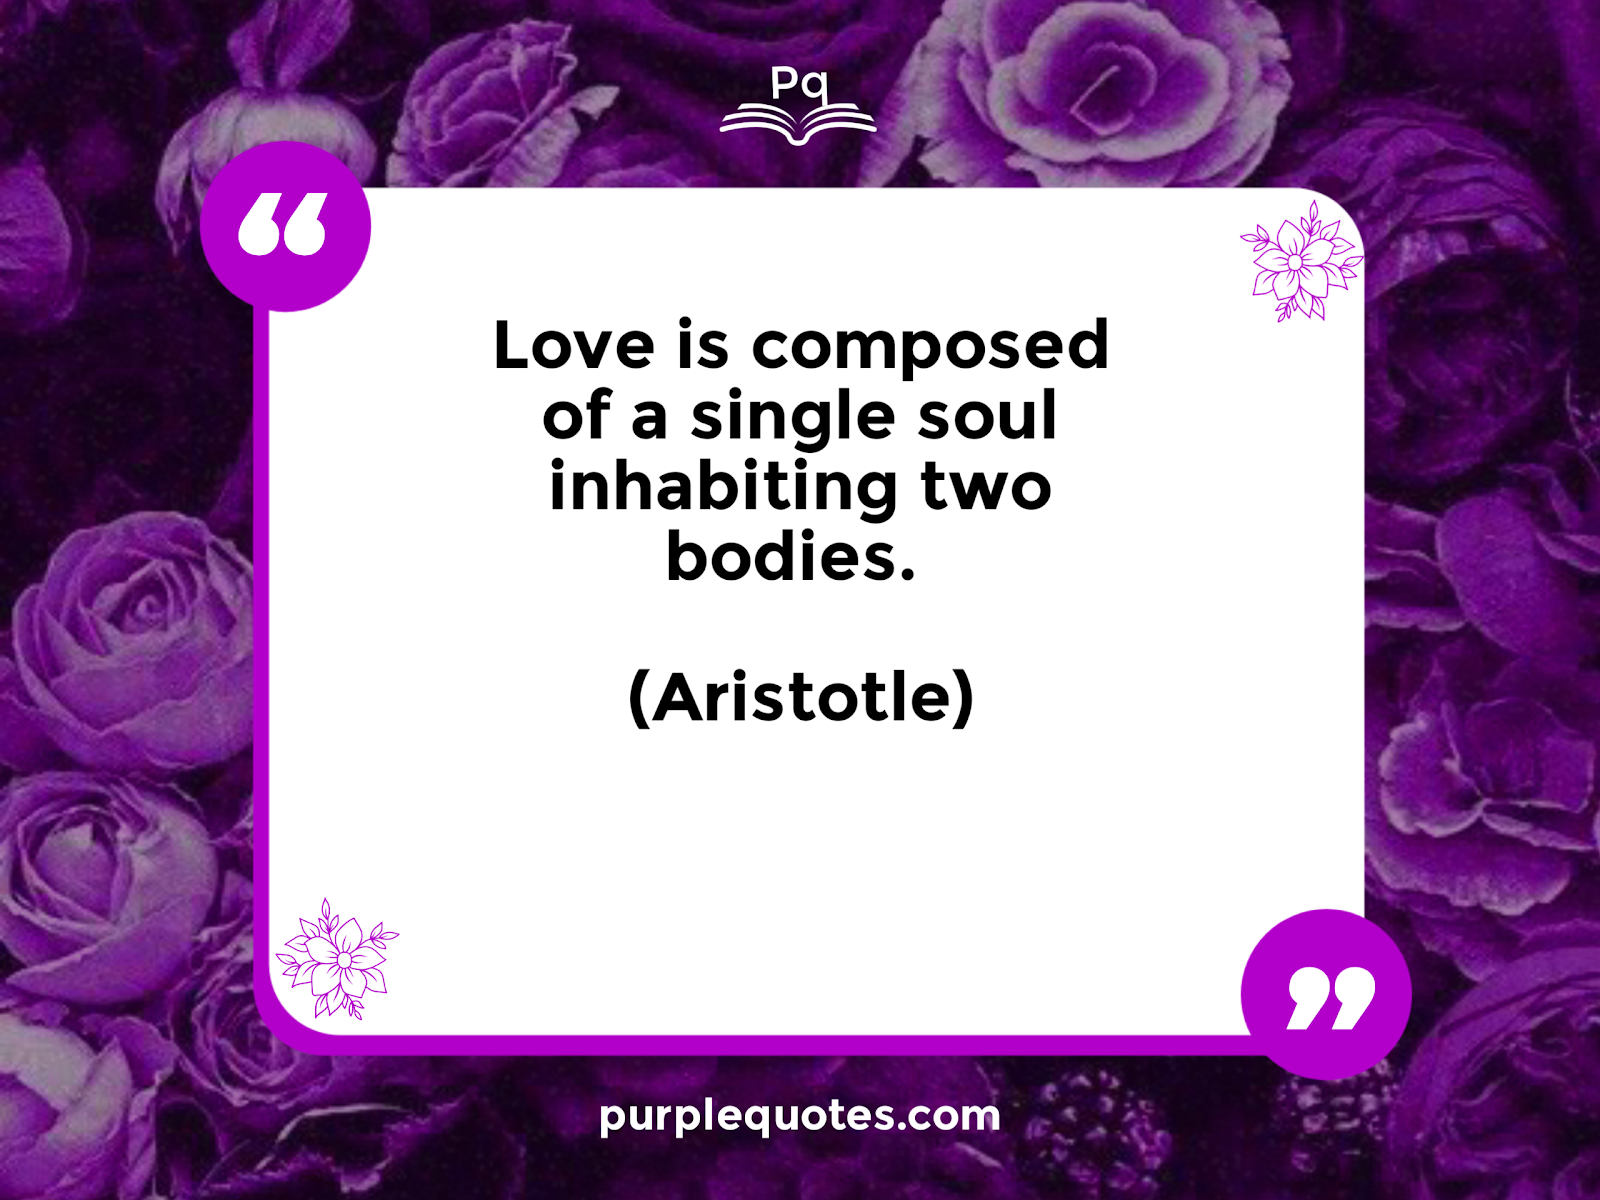 love is composed of a single soul inhabiting two bodies, quote by Aristotle.